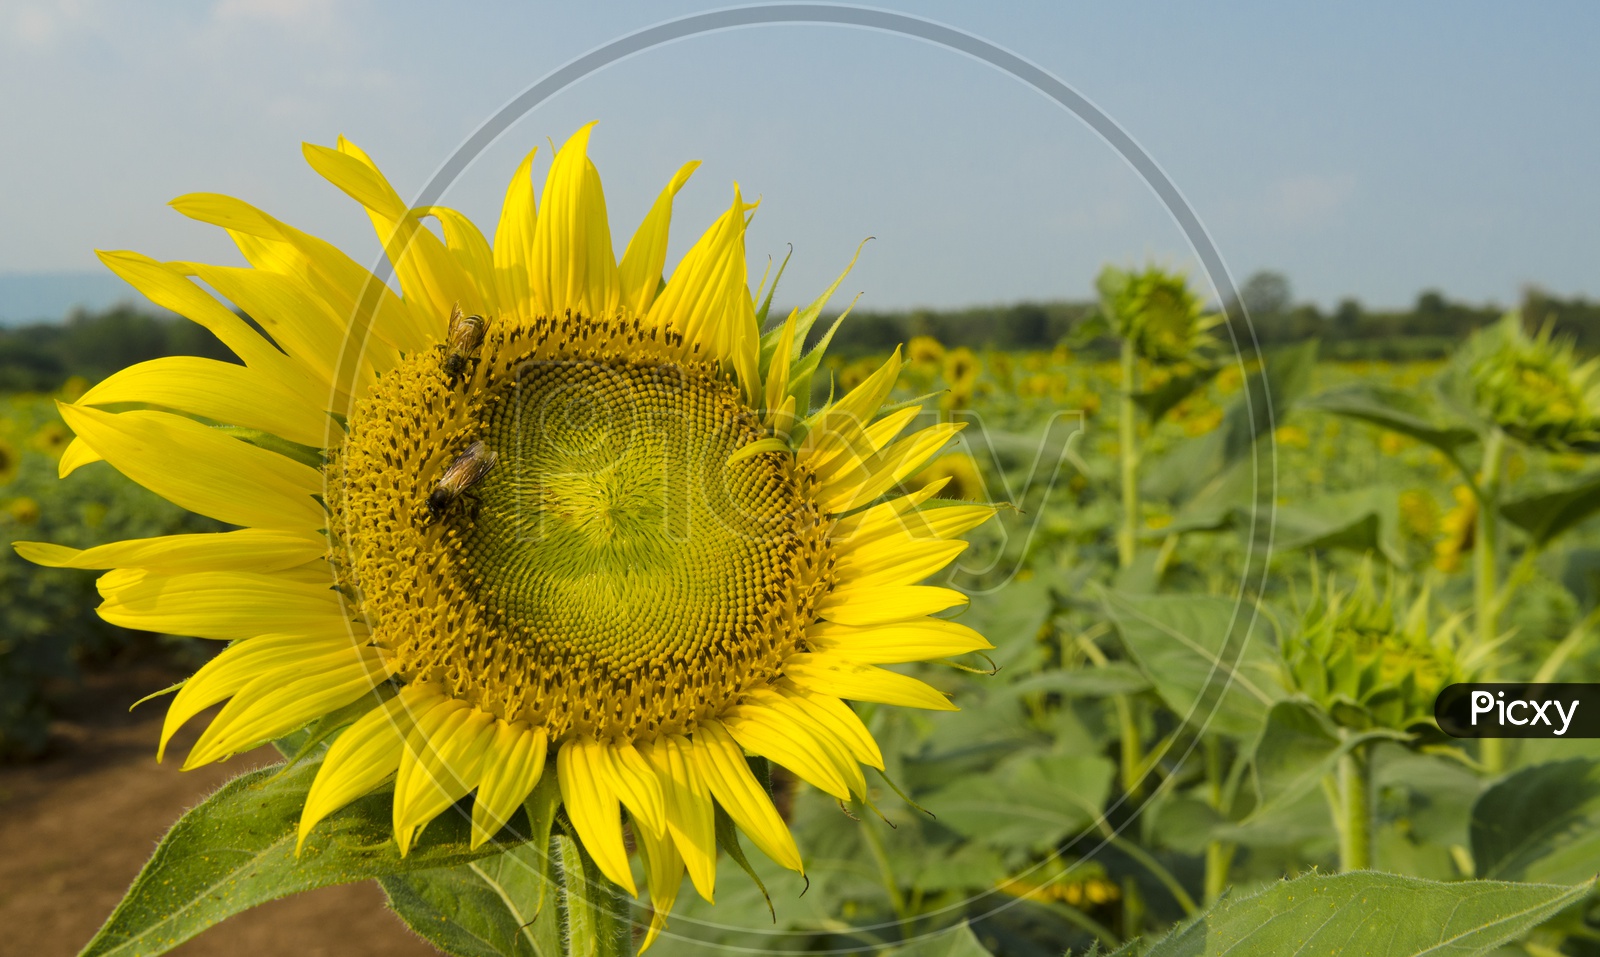 Bees on Sunflower Blooming With Harvesting Field Backdrop